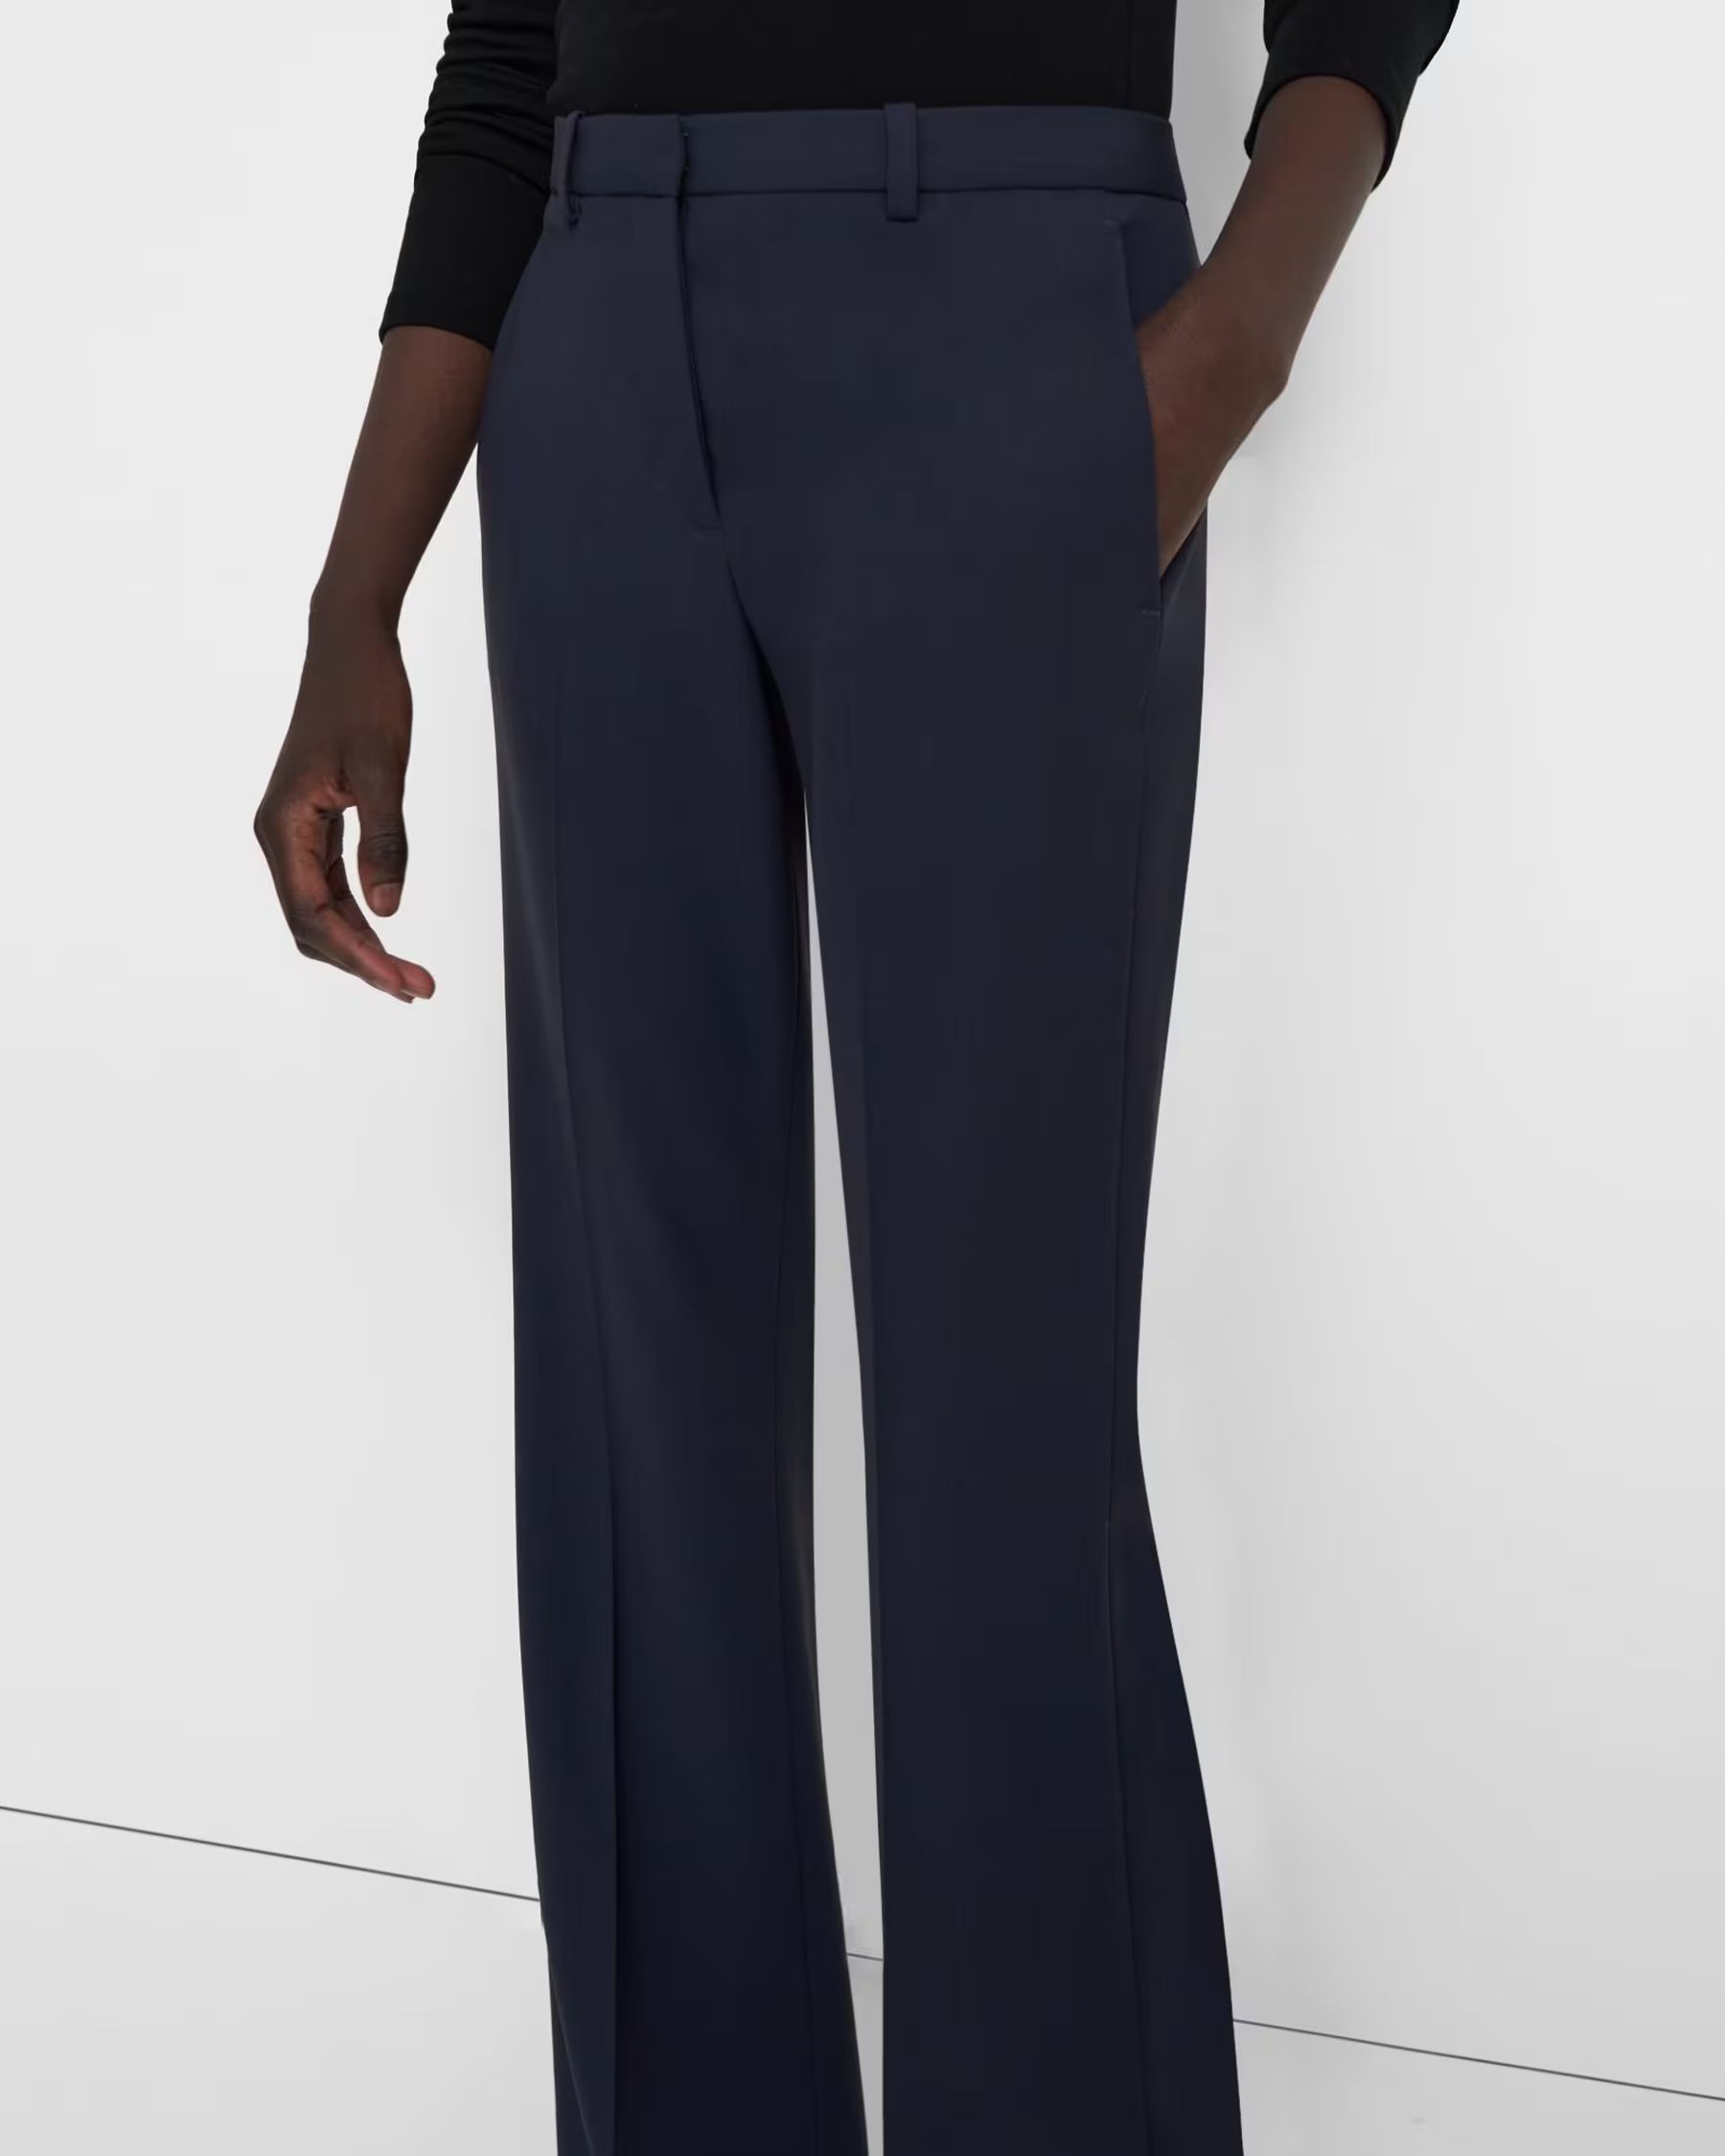 Demitria Pant in Good Wool | Theory